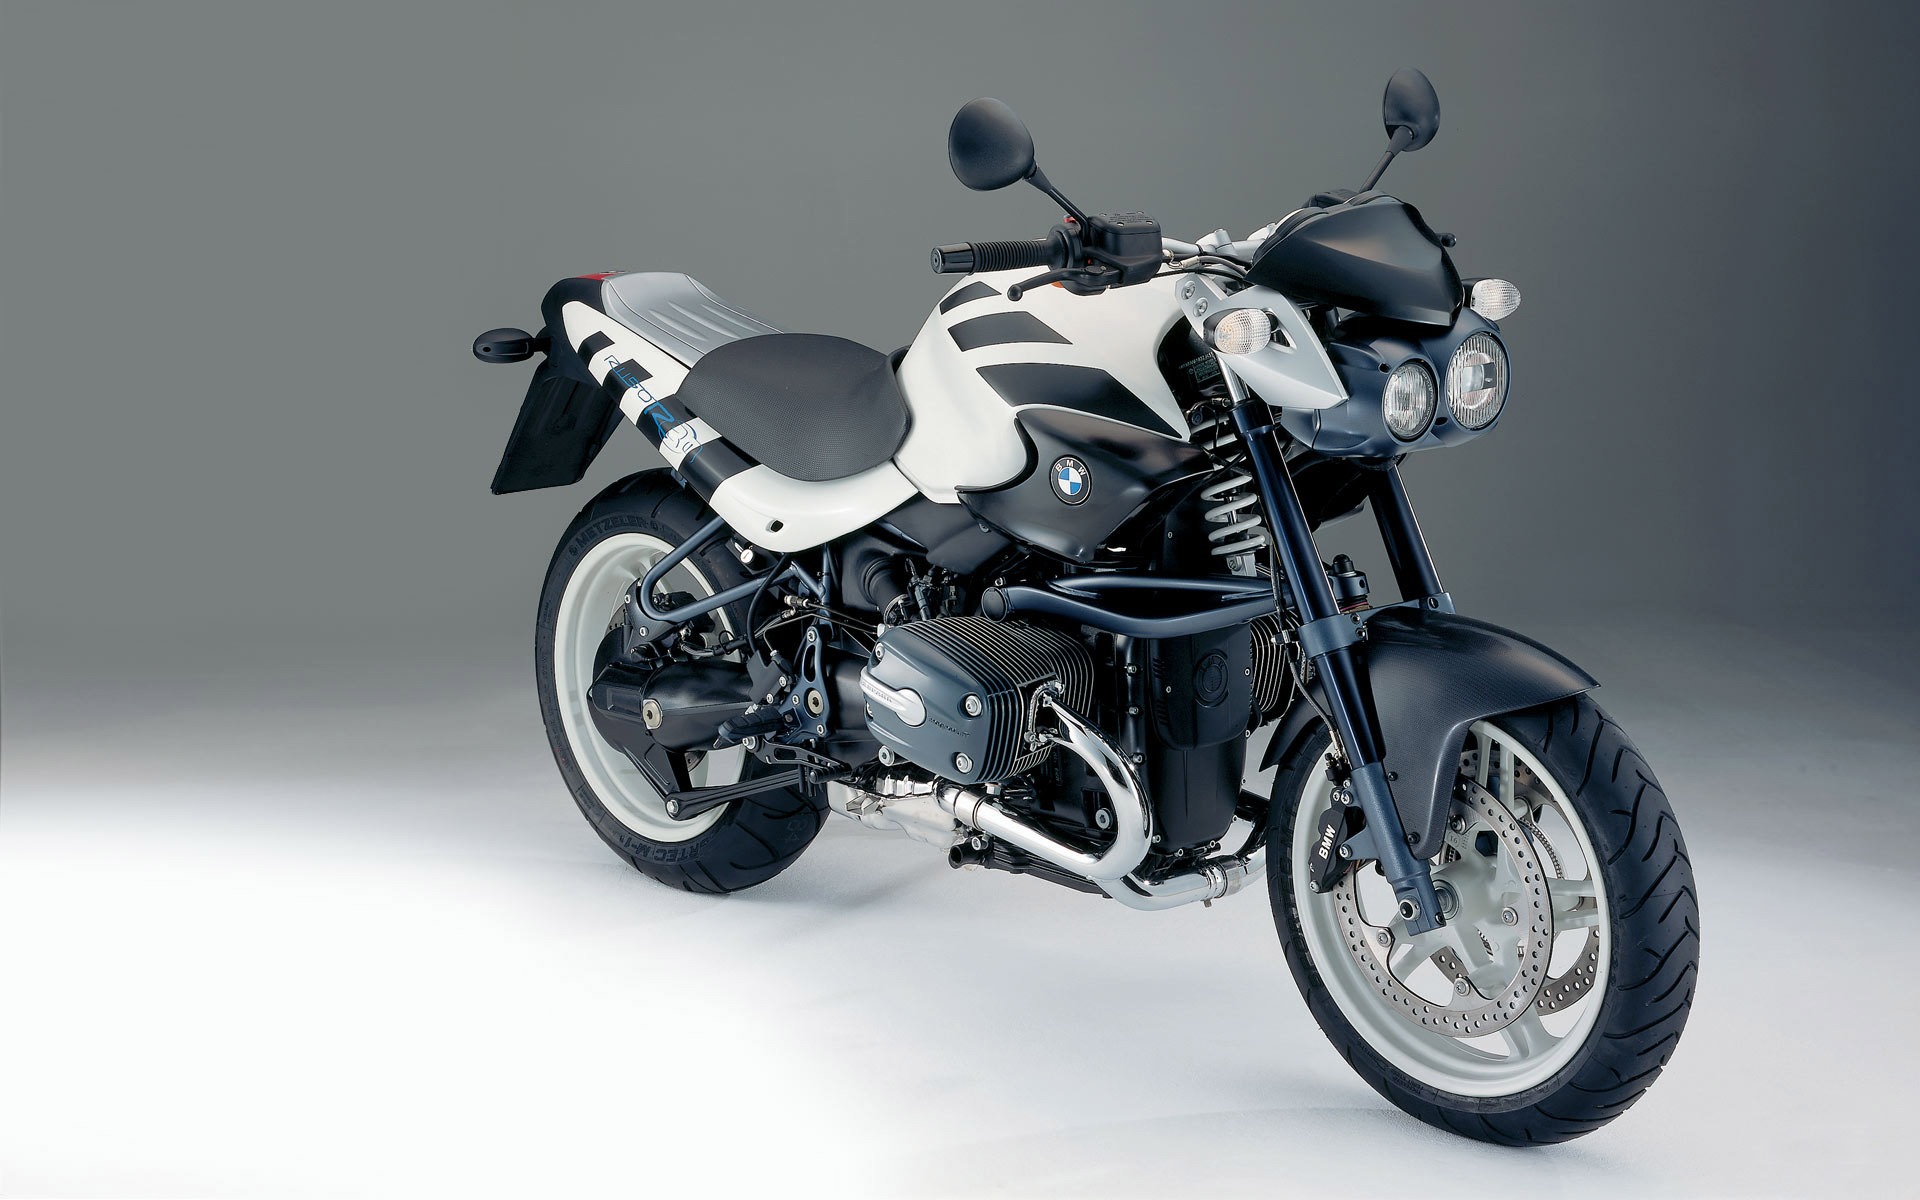 BMW motorcycle wallpapers (2) #3 - 1920x1200